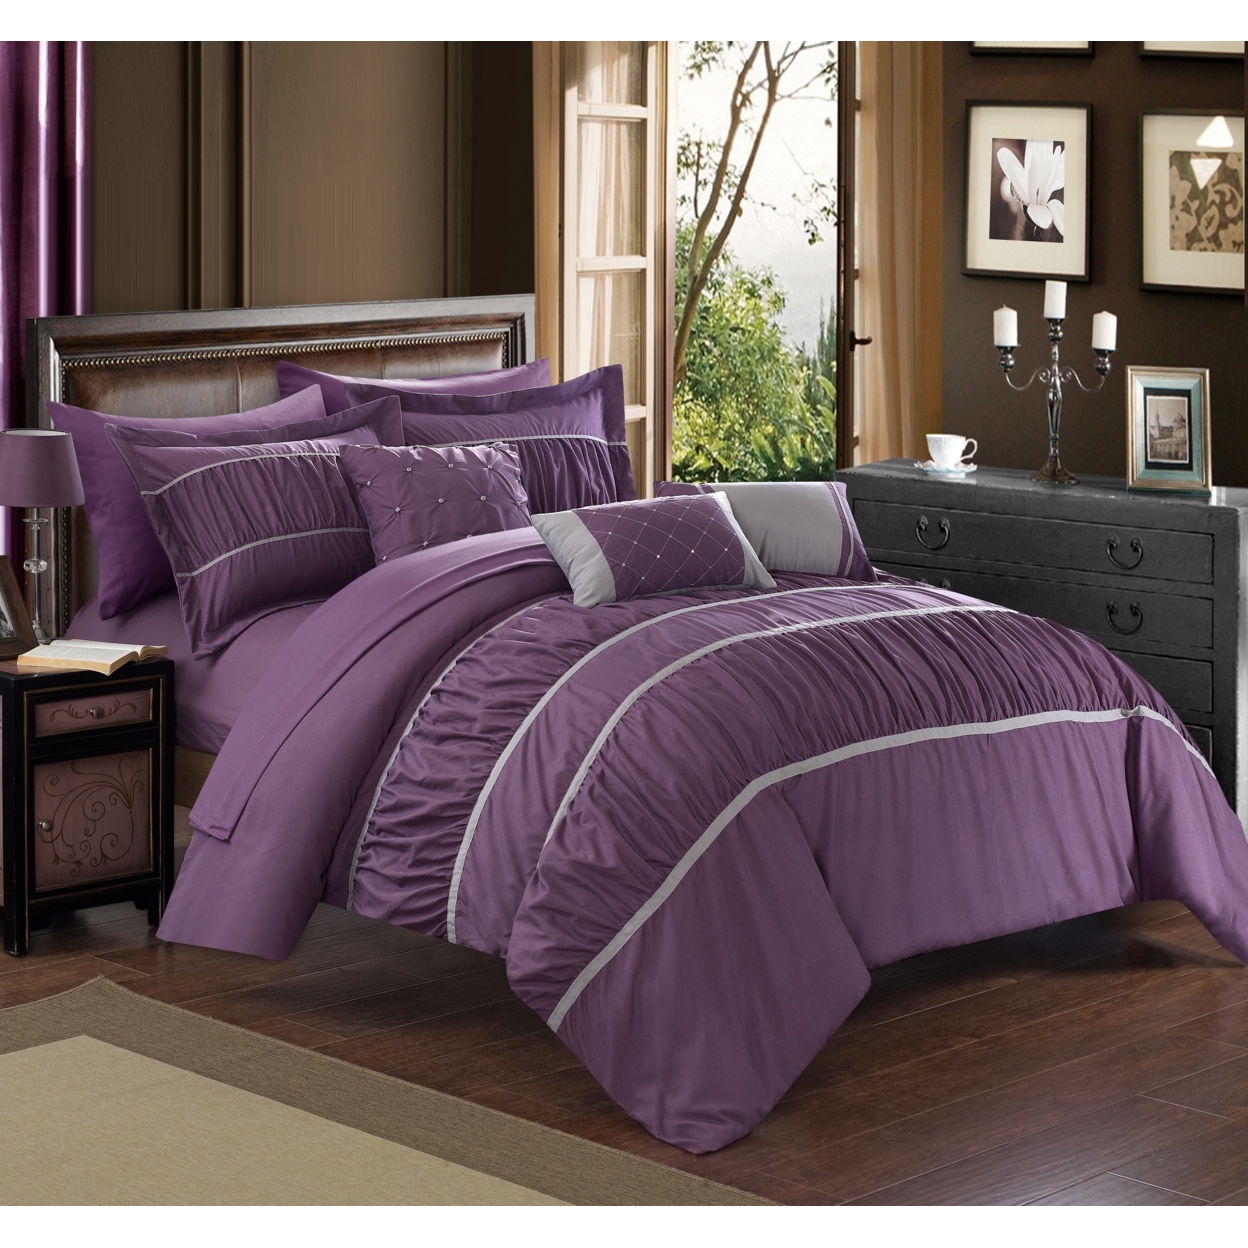 10-Piece Aero Pleated & Ruffled Bed In A Bag Comforter And Sheet Set - Plum, Queen